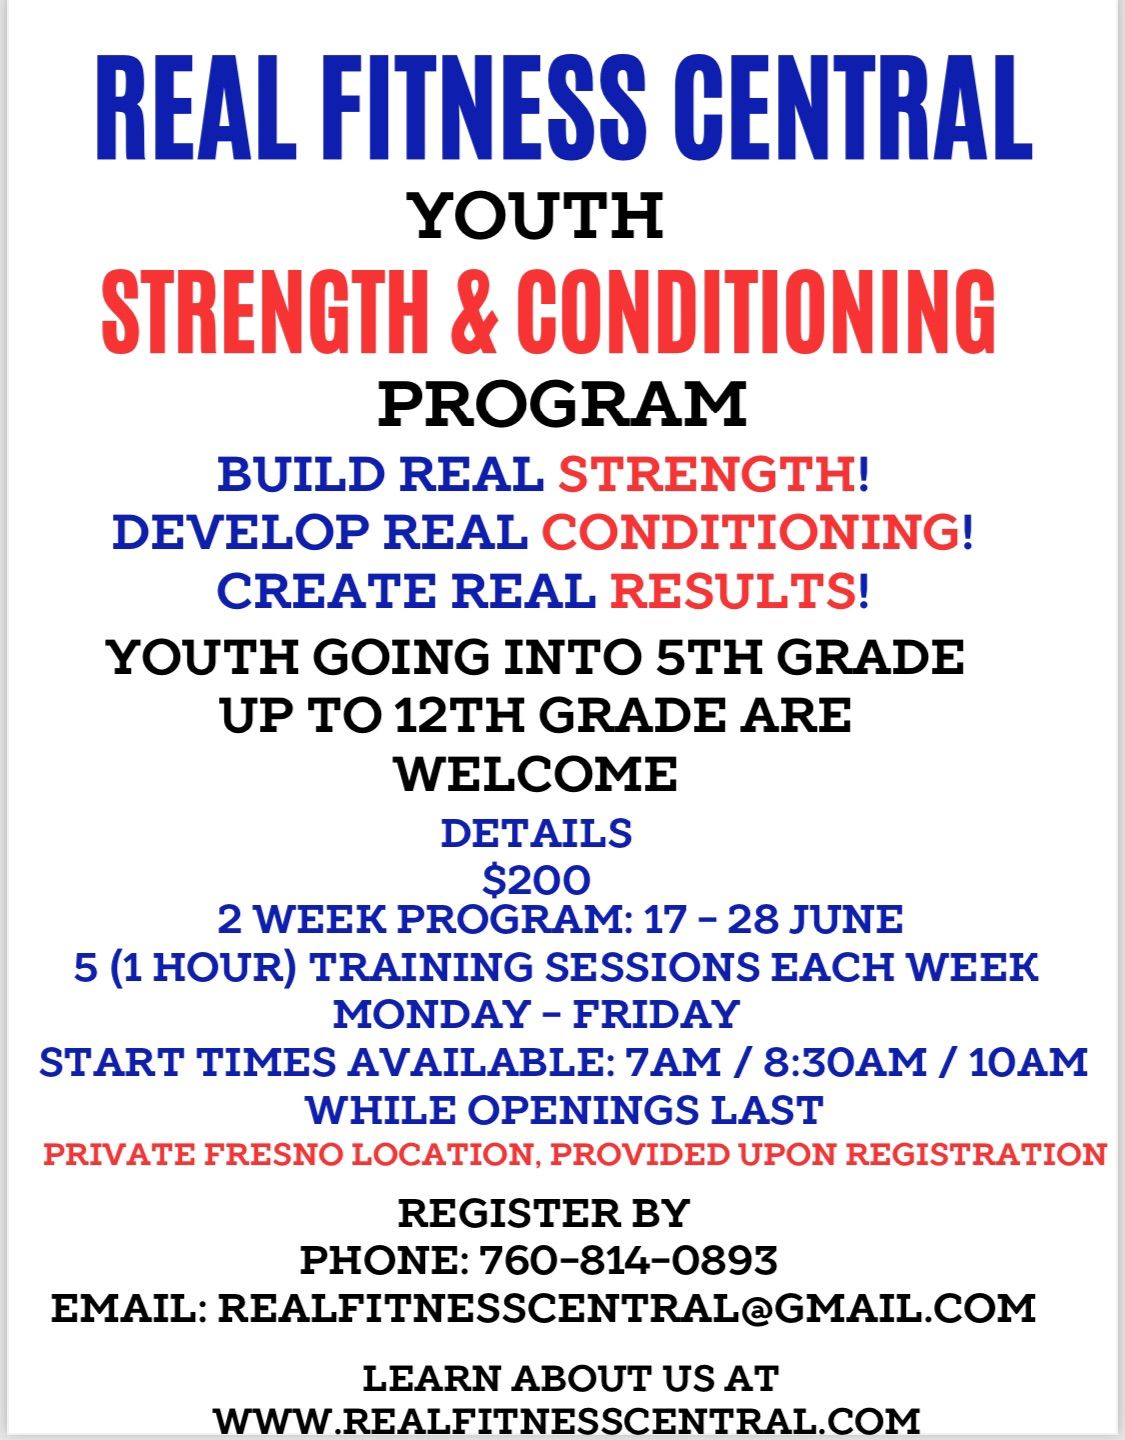 Real Fitness Central's Youth Strength and Conditioning Program